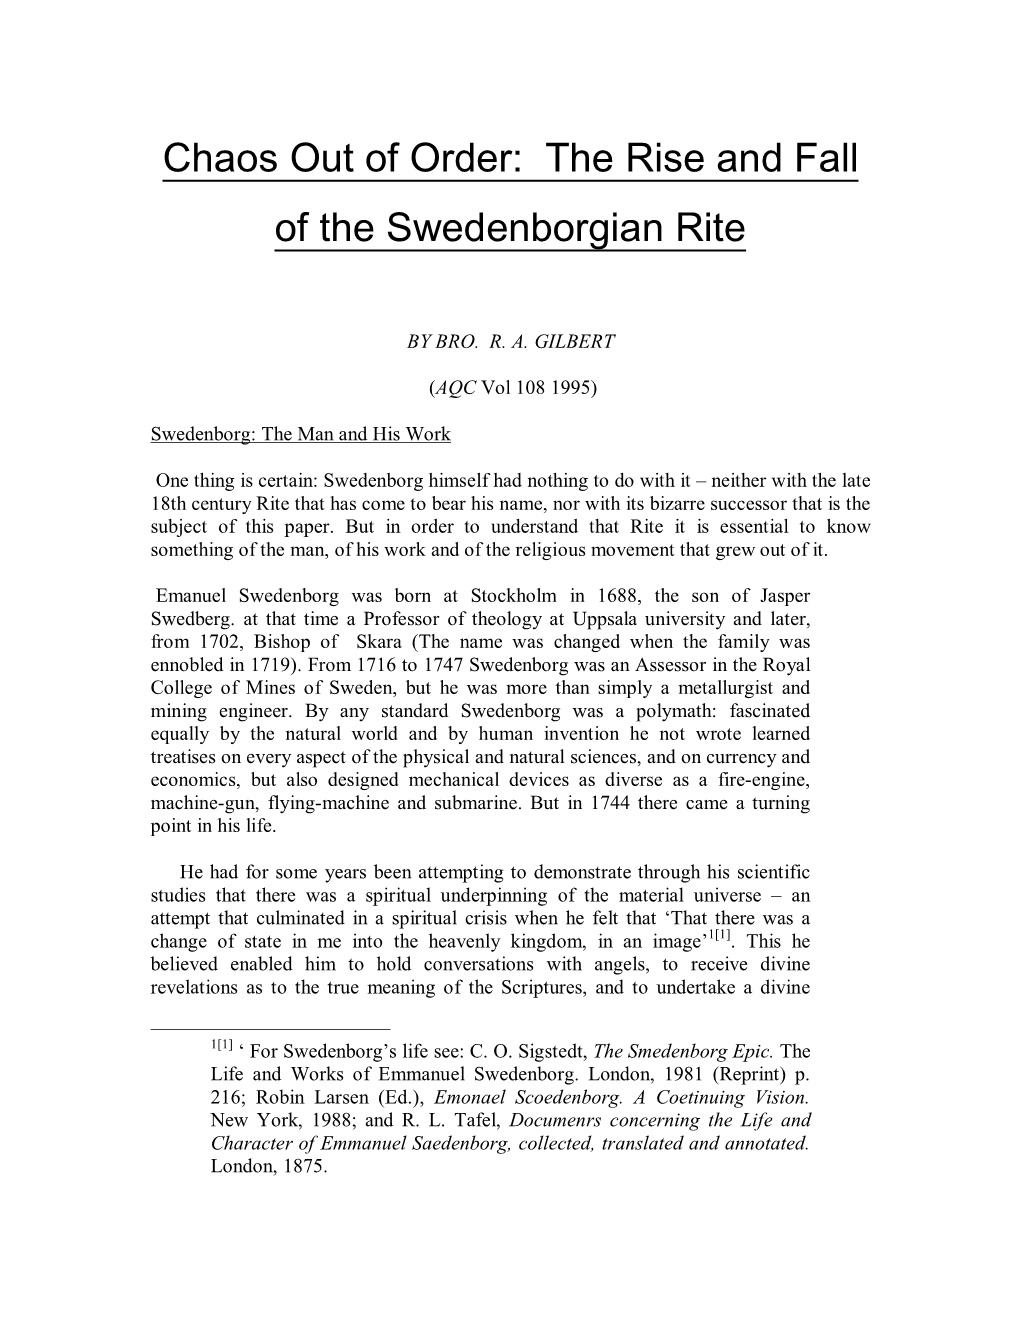 Chaos out of Order: the Rise and Fall of the Swedenborgian Rite